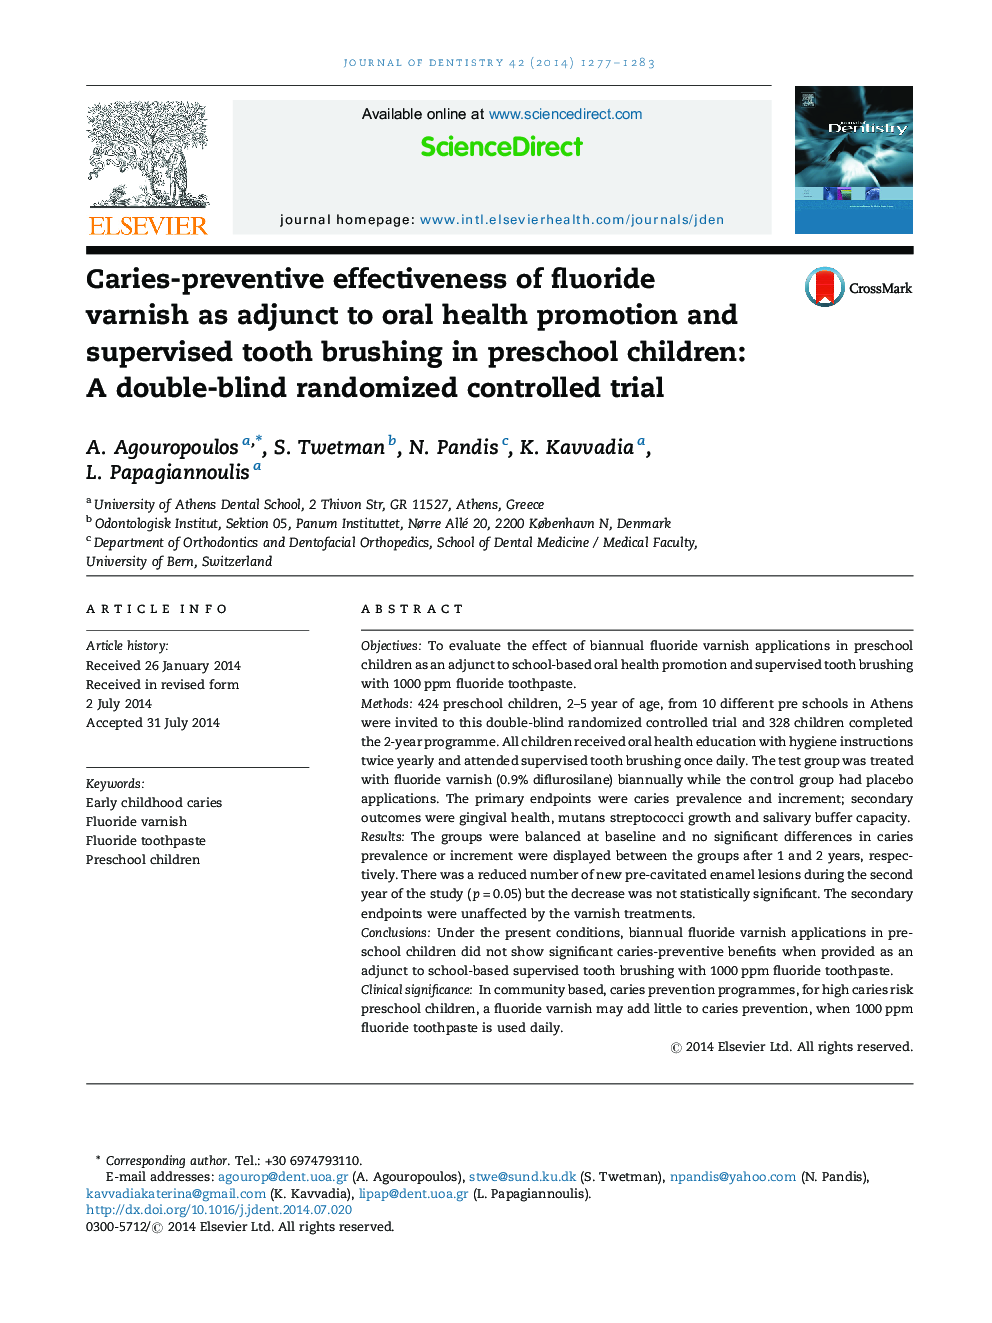 Caries-preventive effectiveness of fluoride varnish as adjunct to oral health promotion and supervised tooth brushing in preschool children: A double-blind randomized controlled trial